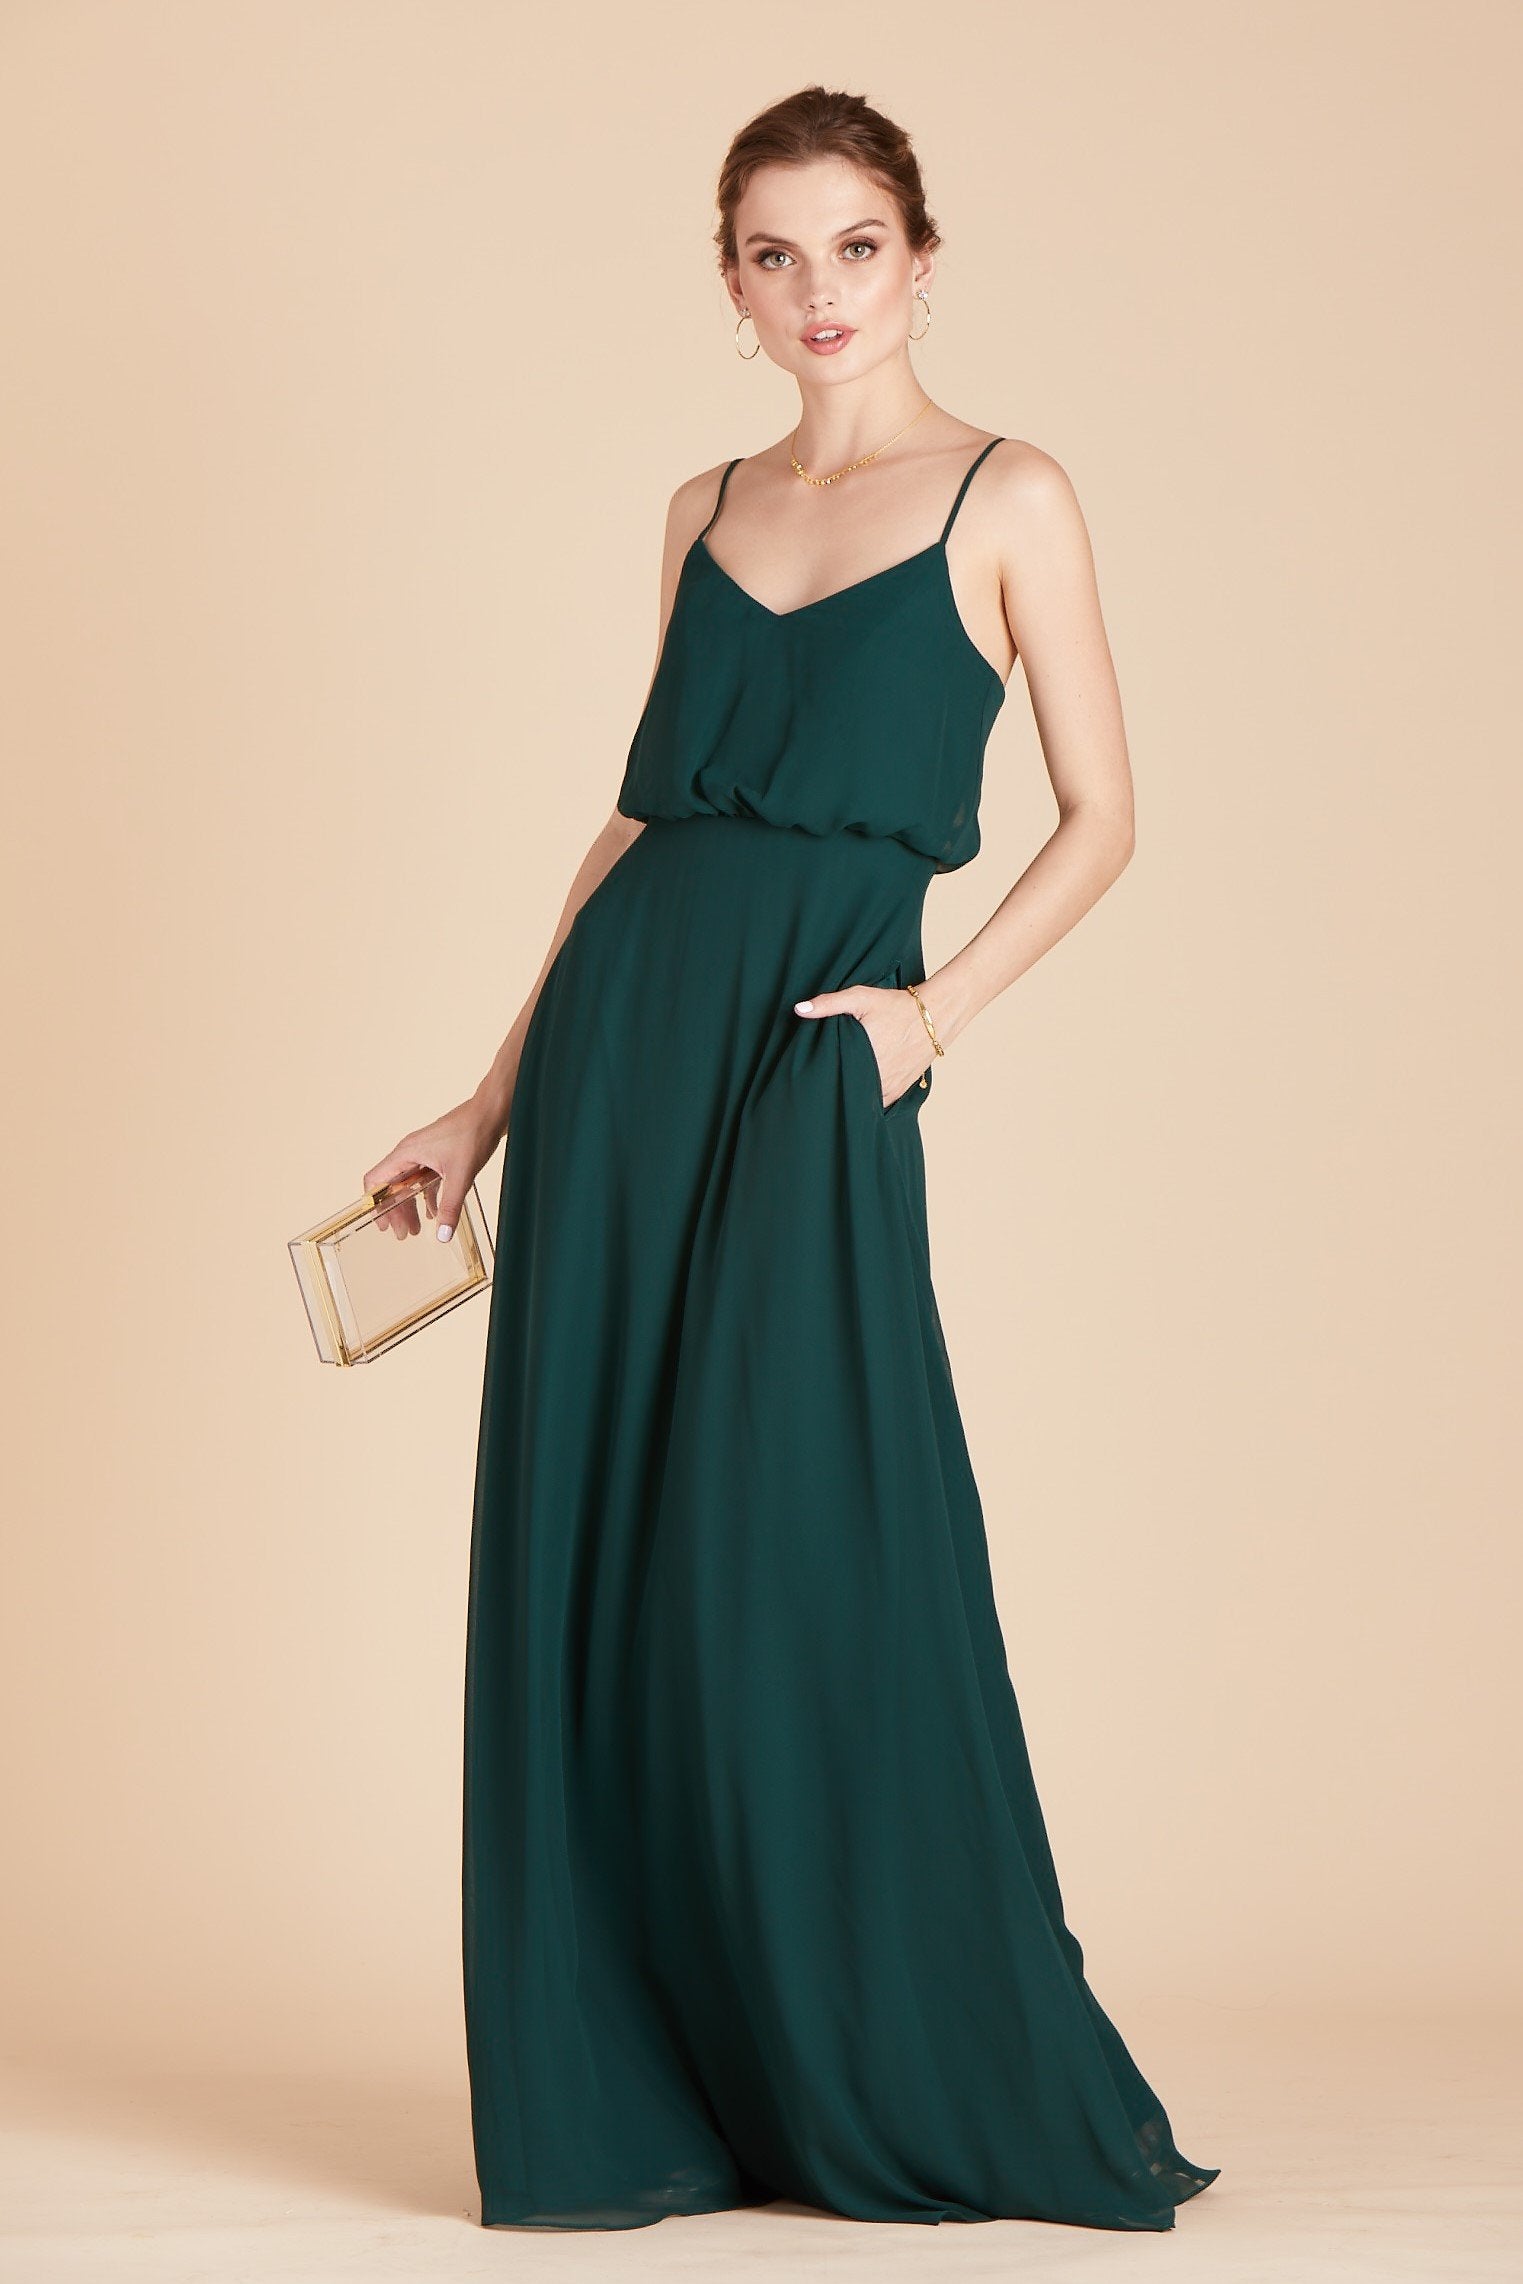 Gwennie bridesmaid dress in emerald green chiffon by Birdy Grey, front view with hand in pocket